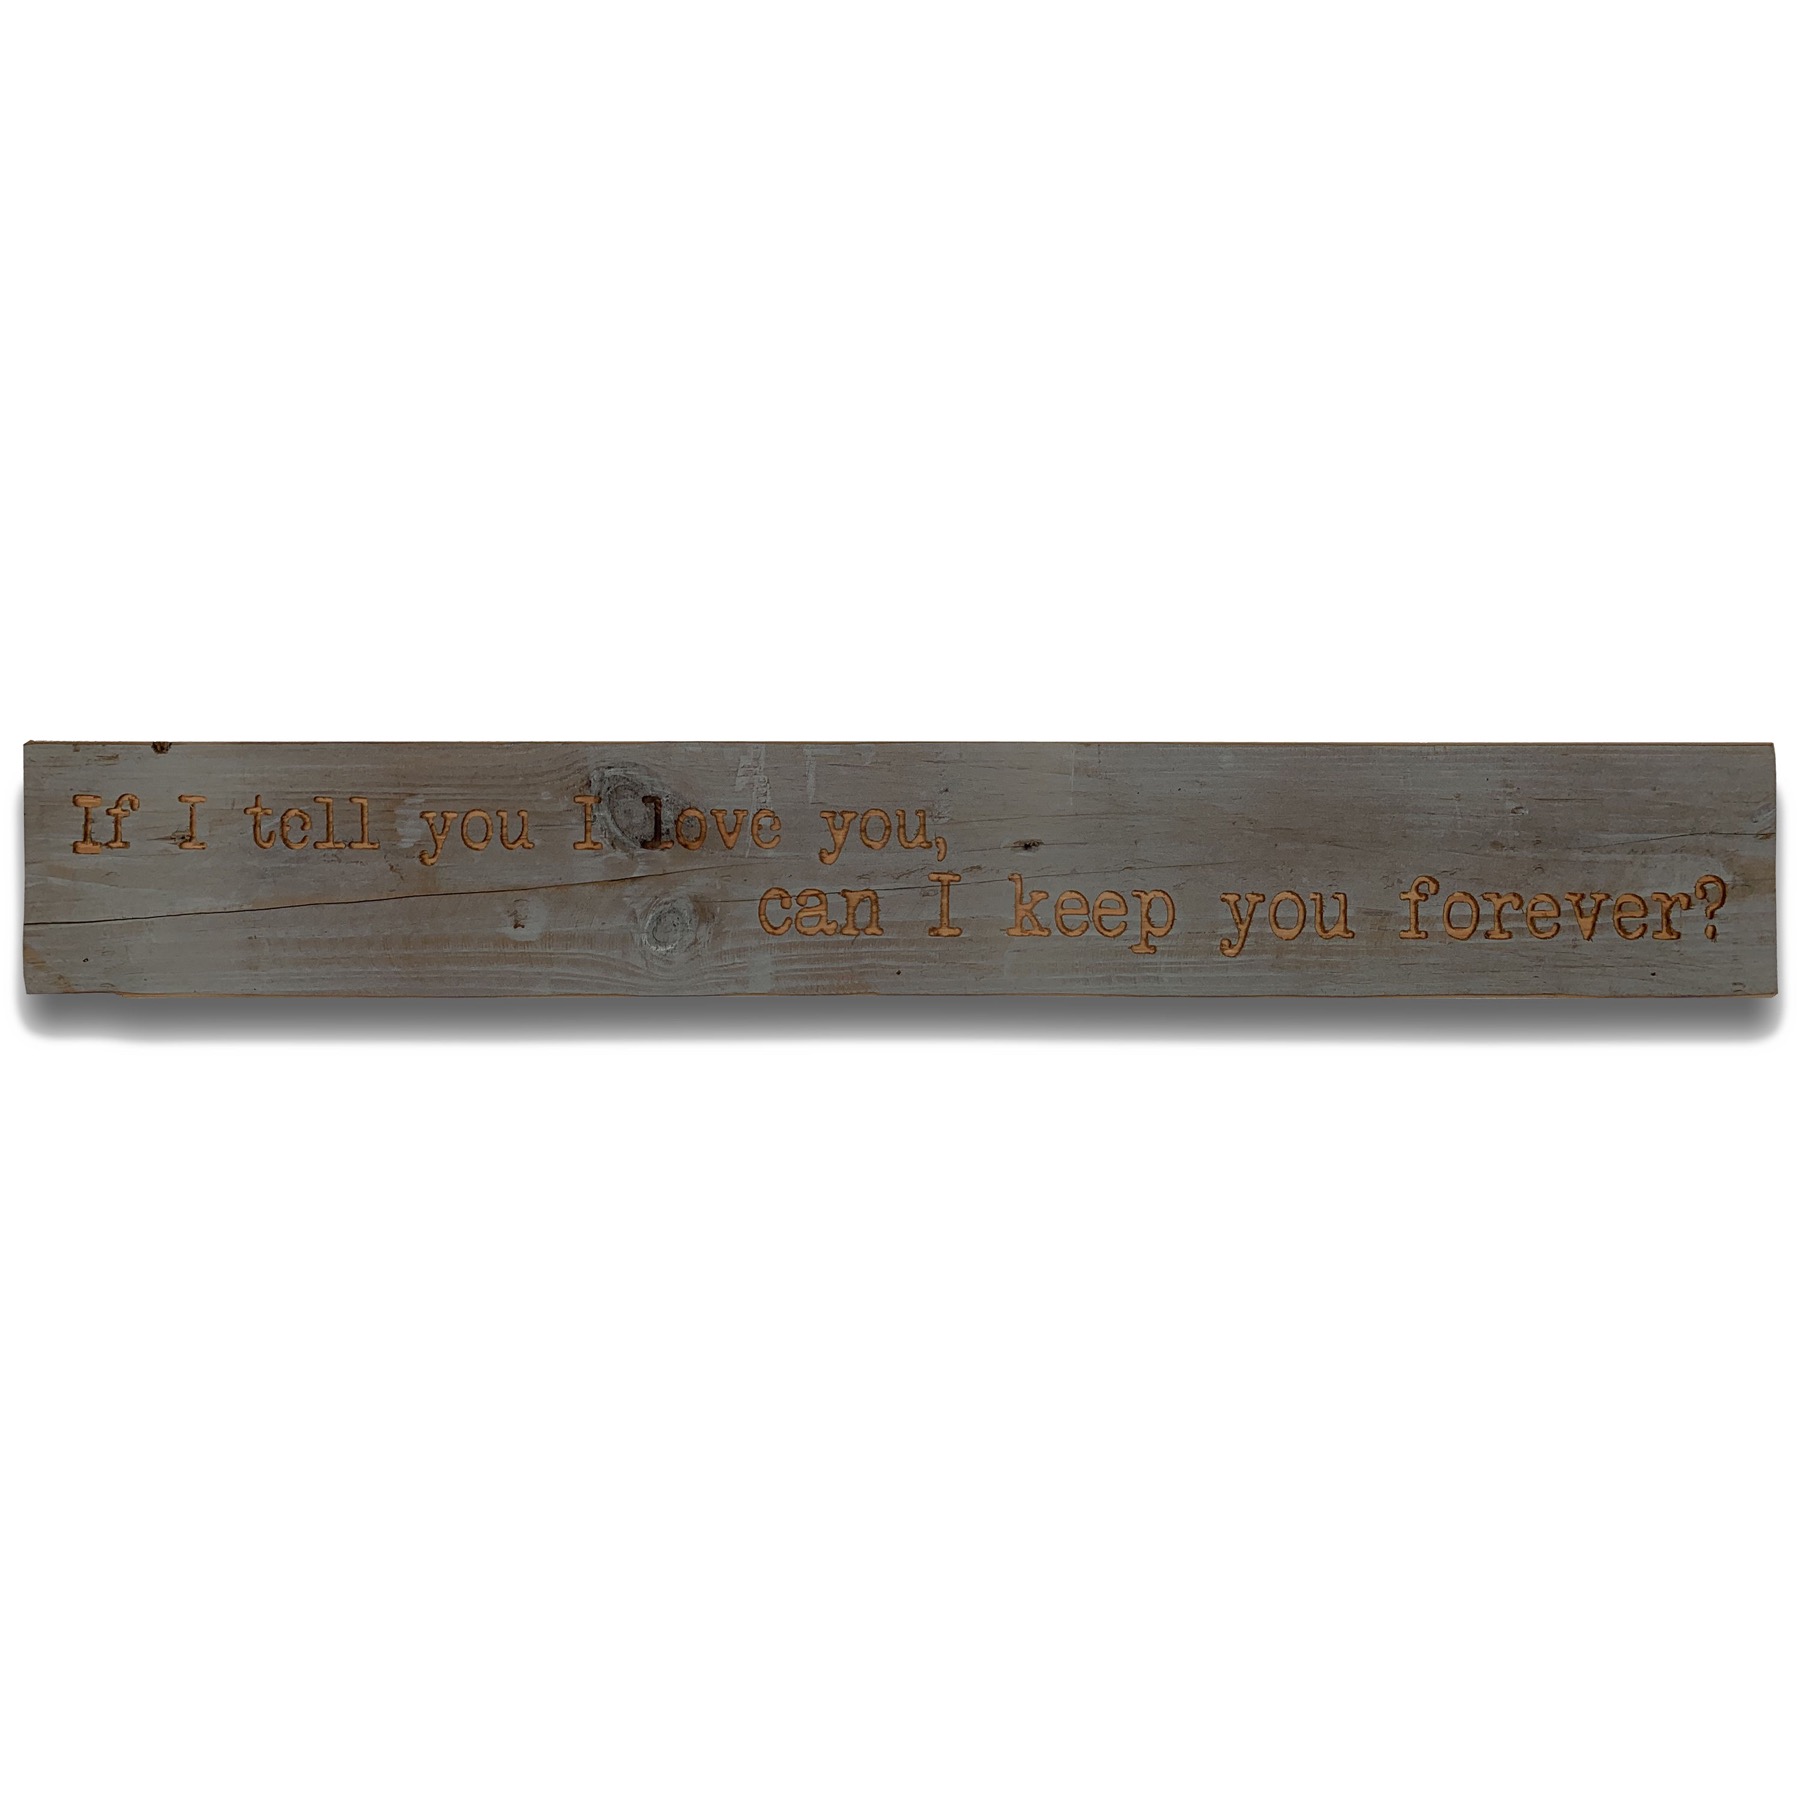 I Love You Grey Wash Wooden Message Plaque - Image 1